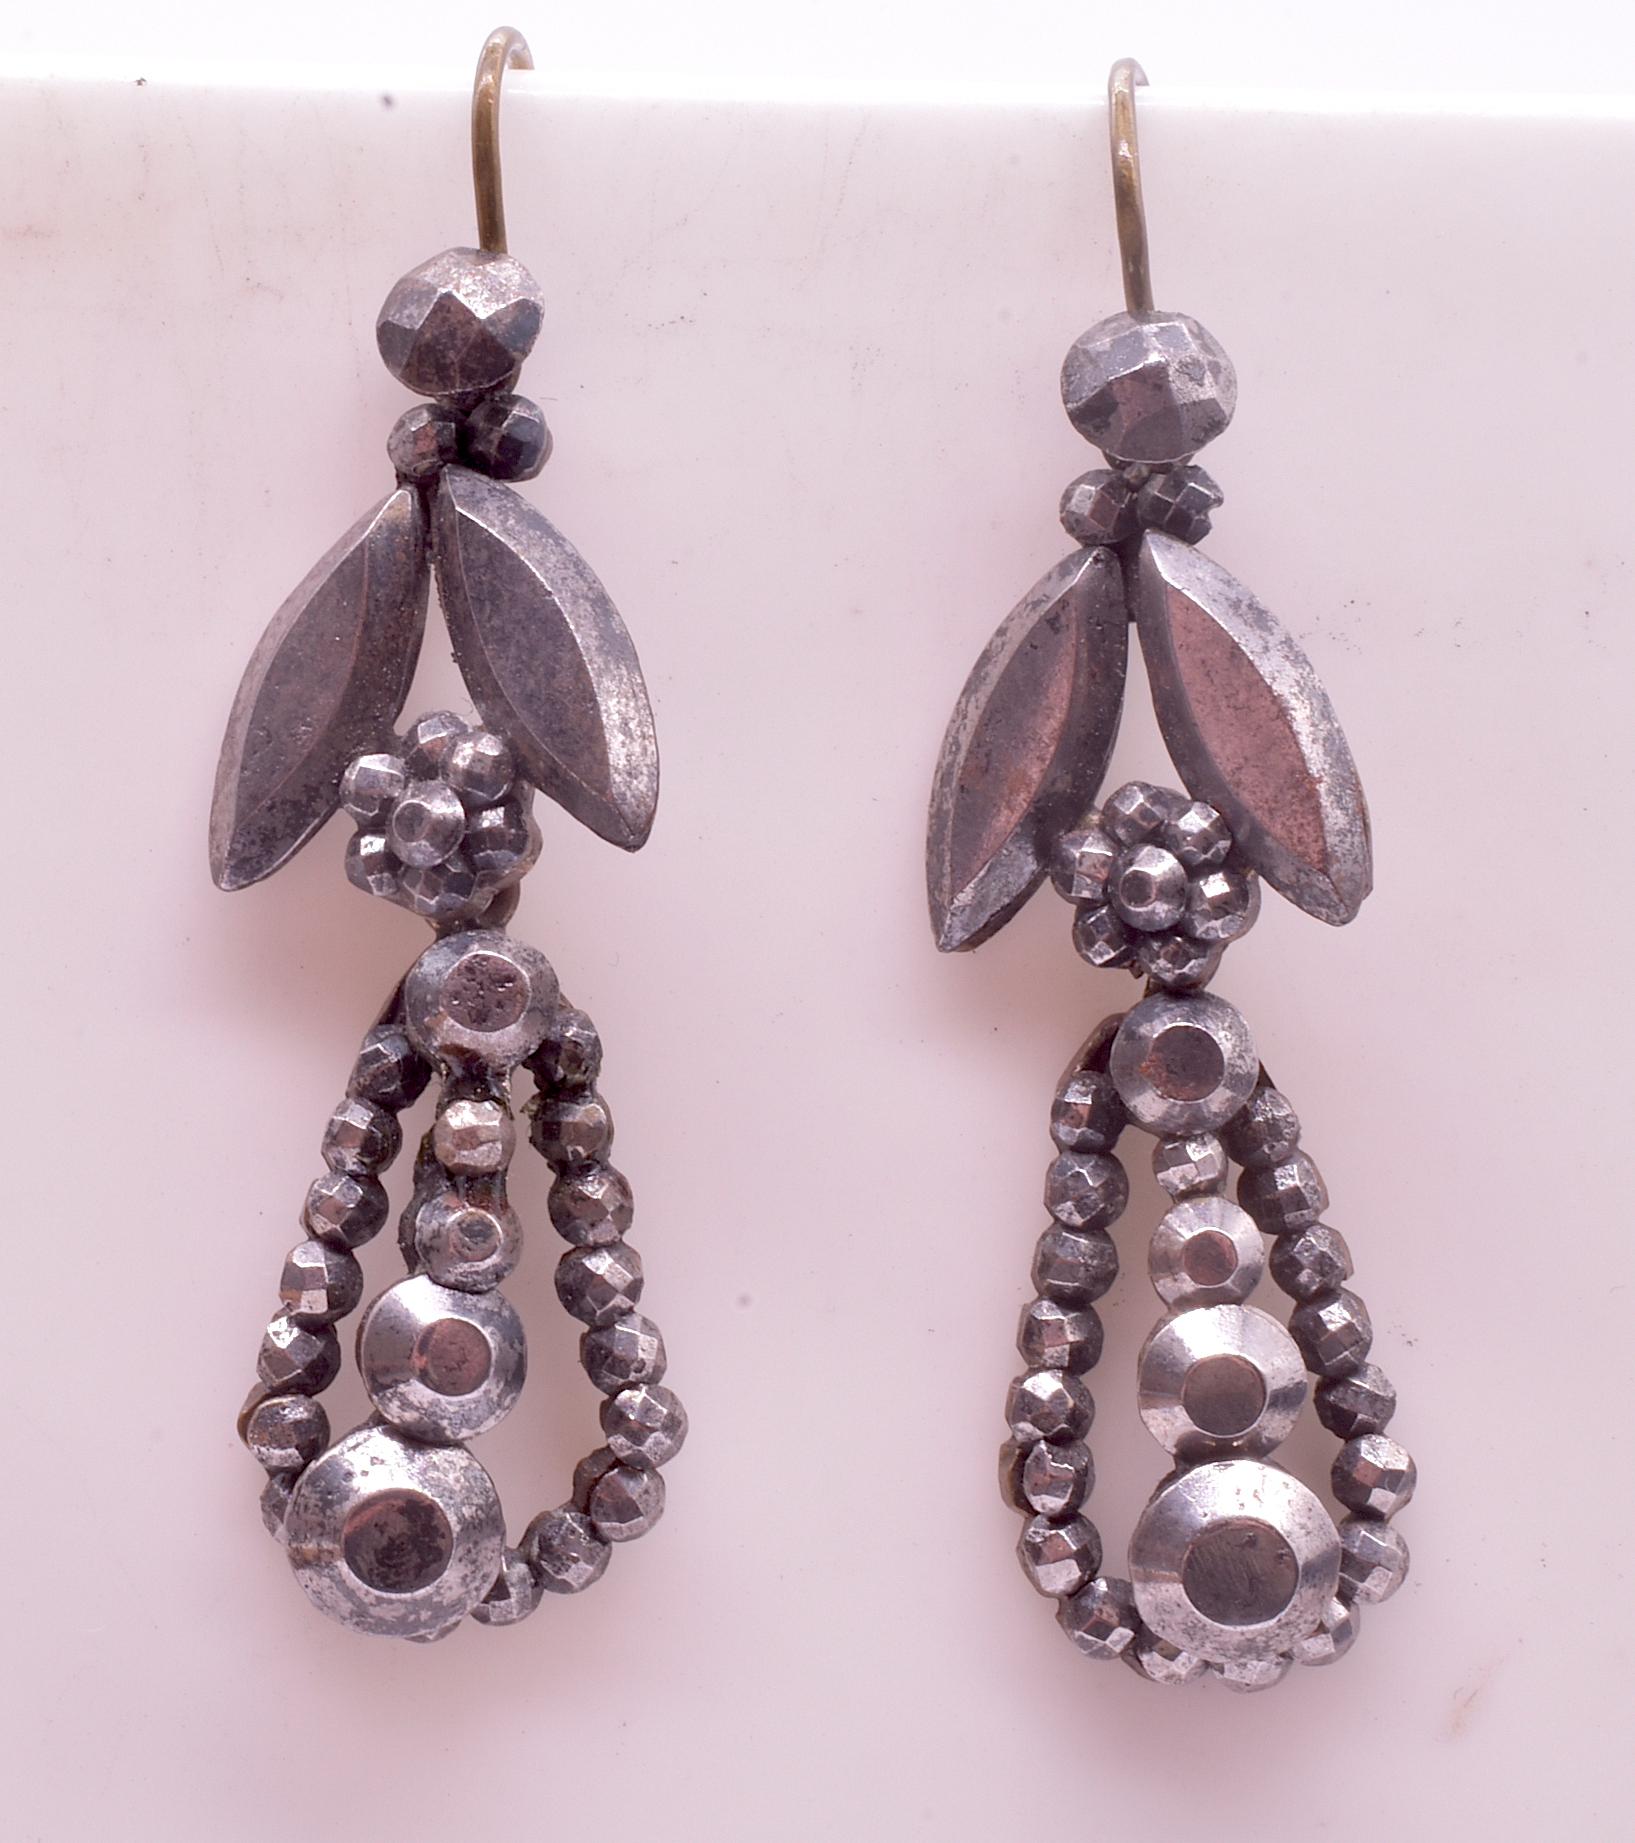 Sparkling Victorian cut steel earrings with faceted balls, leaves and circles. Cut steel was popular in England for its luster and shine in candlelight. Each tiny stud is hand cut and embedded in a metal base plate. Cut steel was the only form of